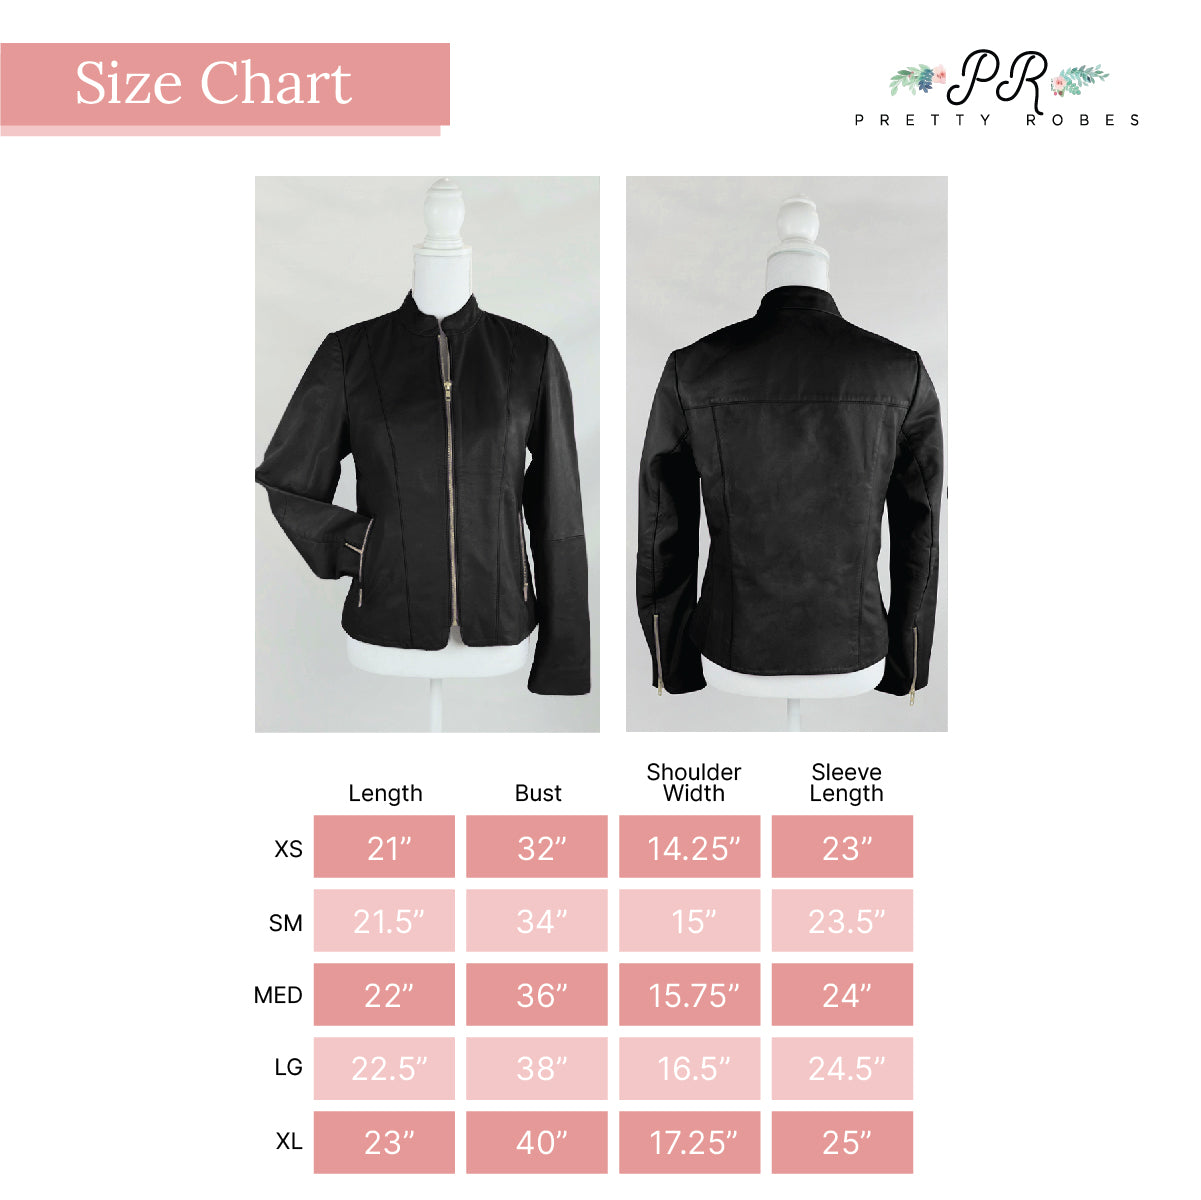 (Real Leather) Classic Women's Leather Jacket